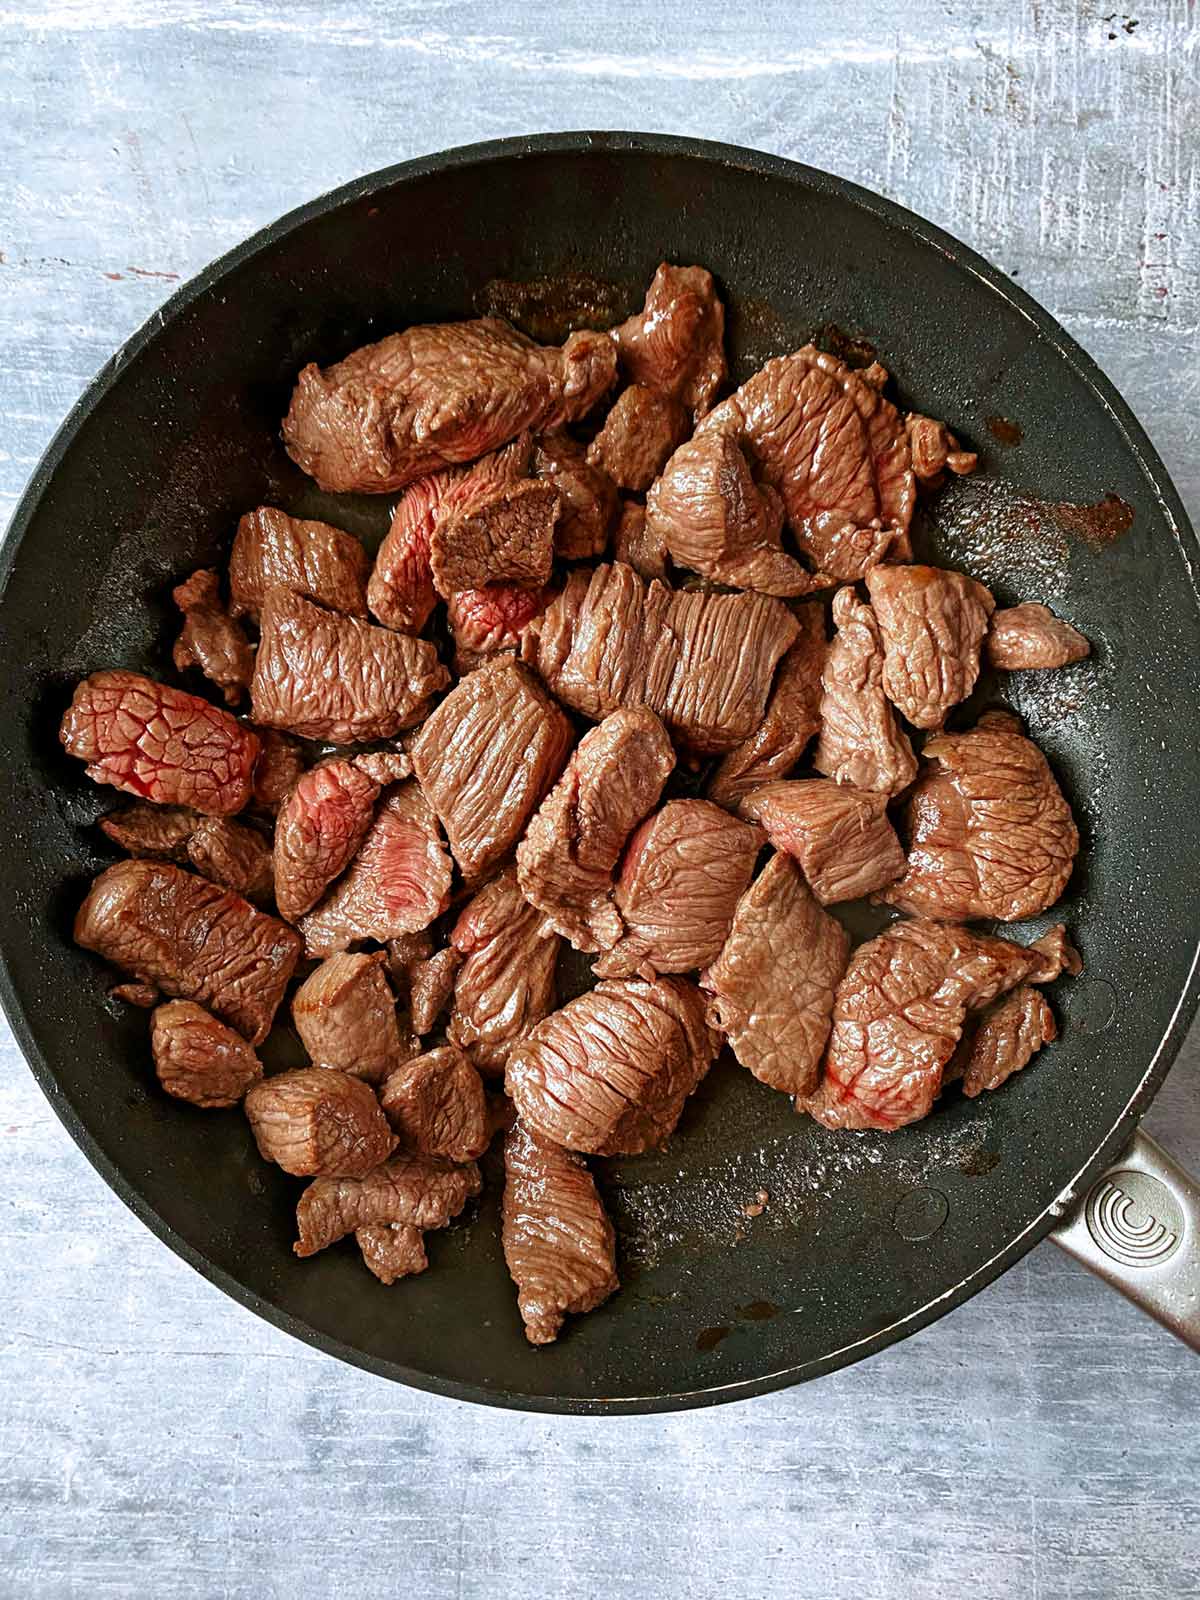 Chunks of beef cooking in a frying pan.